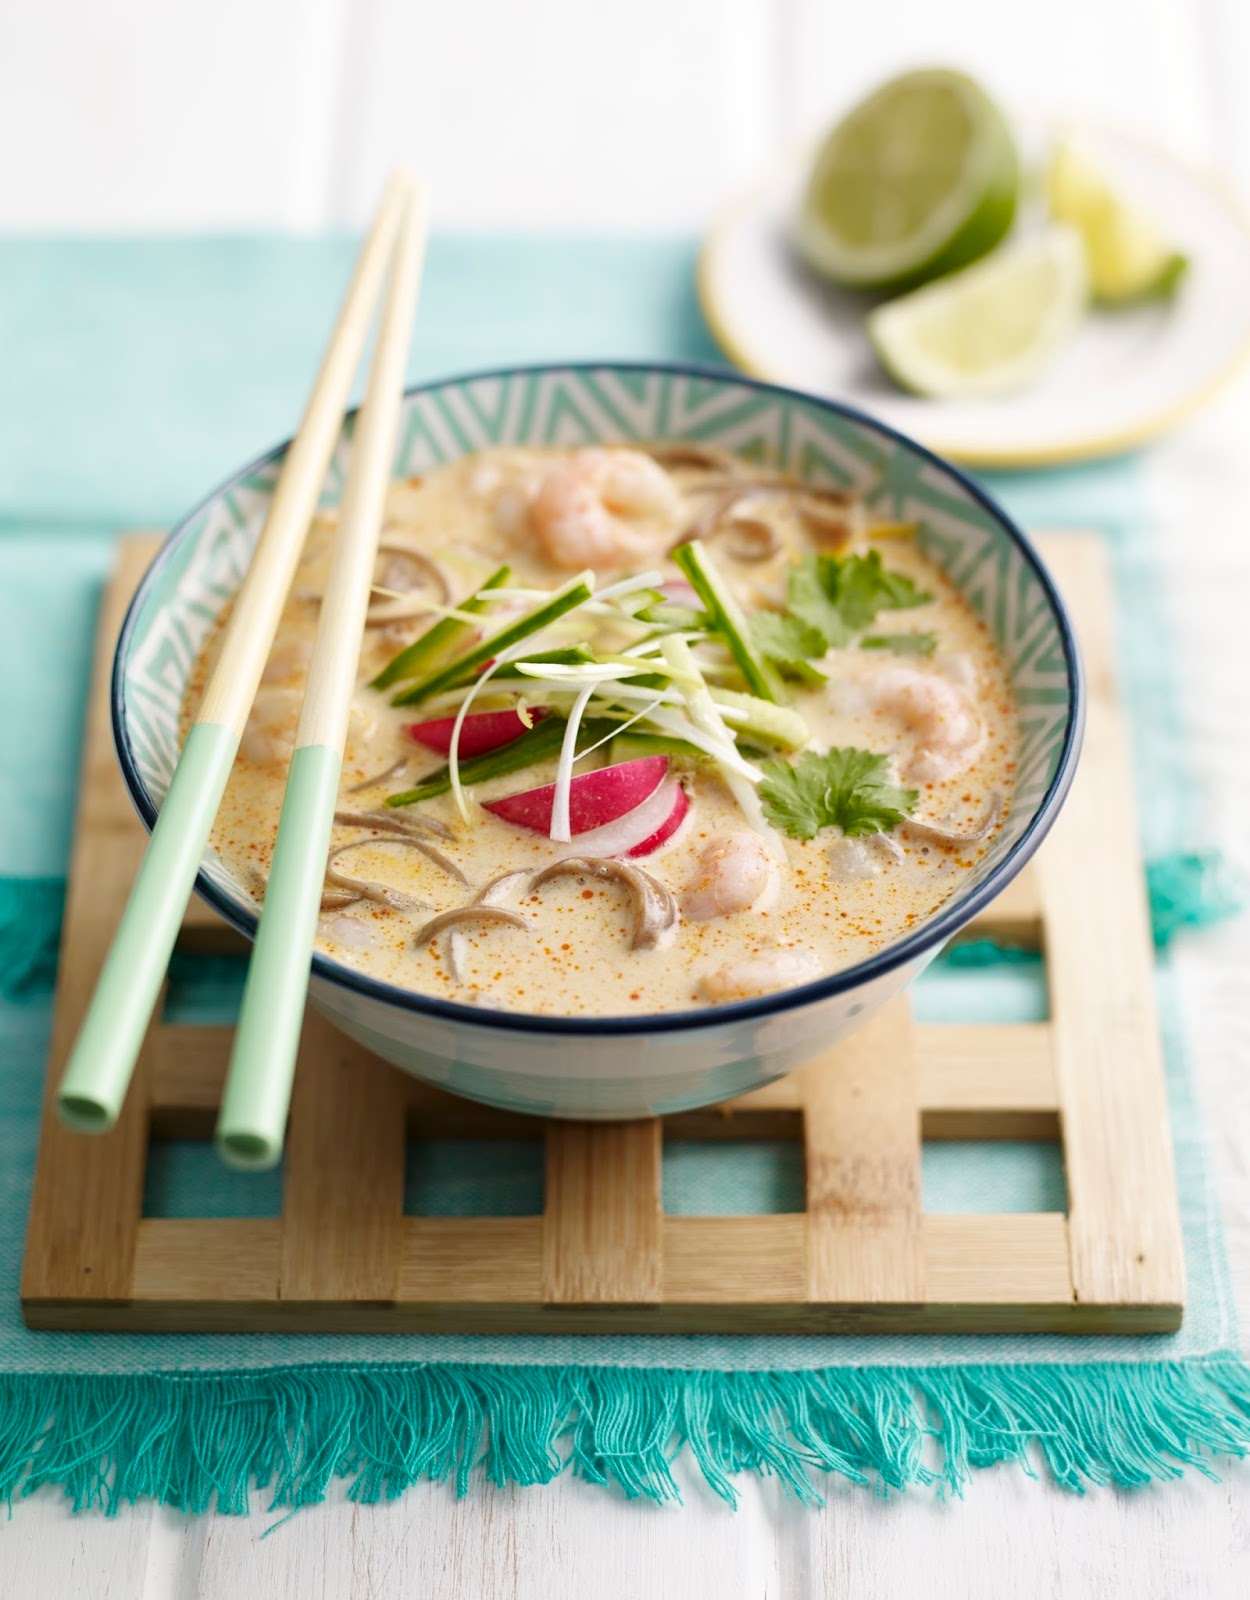 How To Make A Coconut and Prawn Laksa